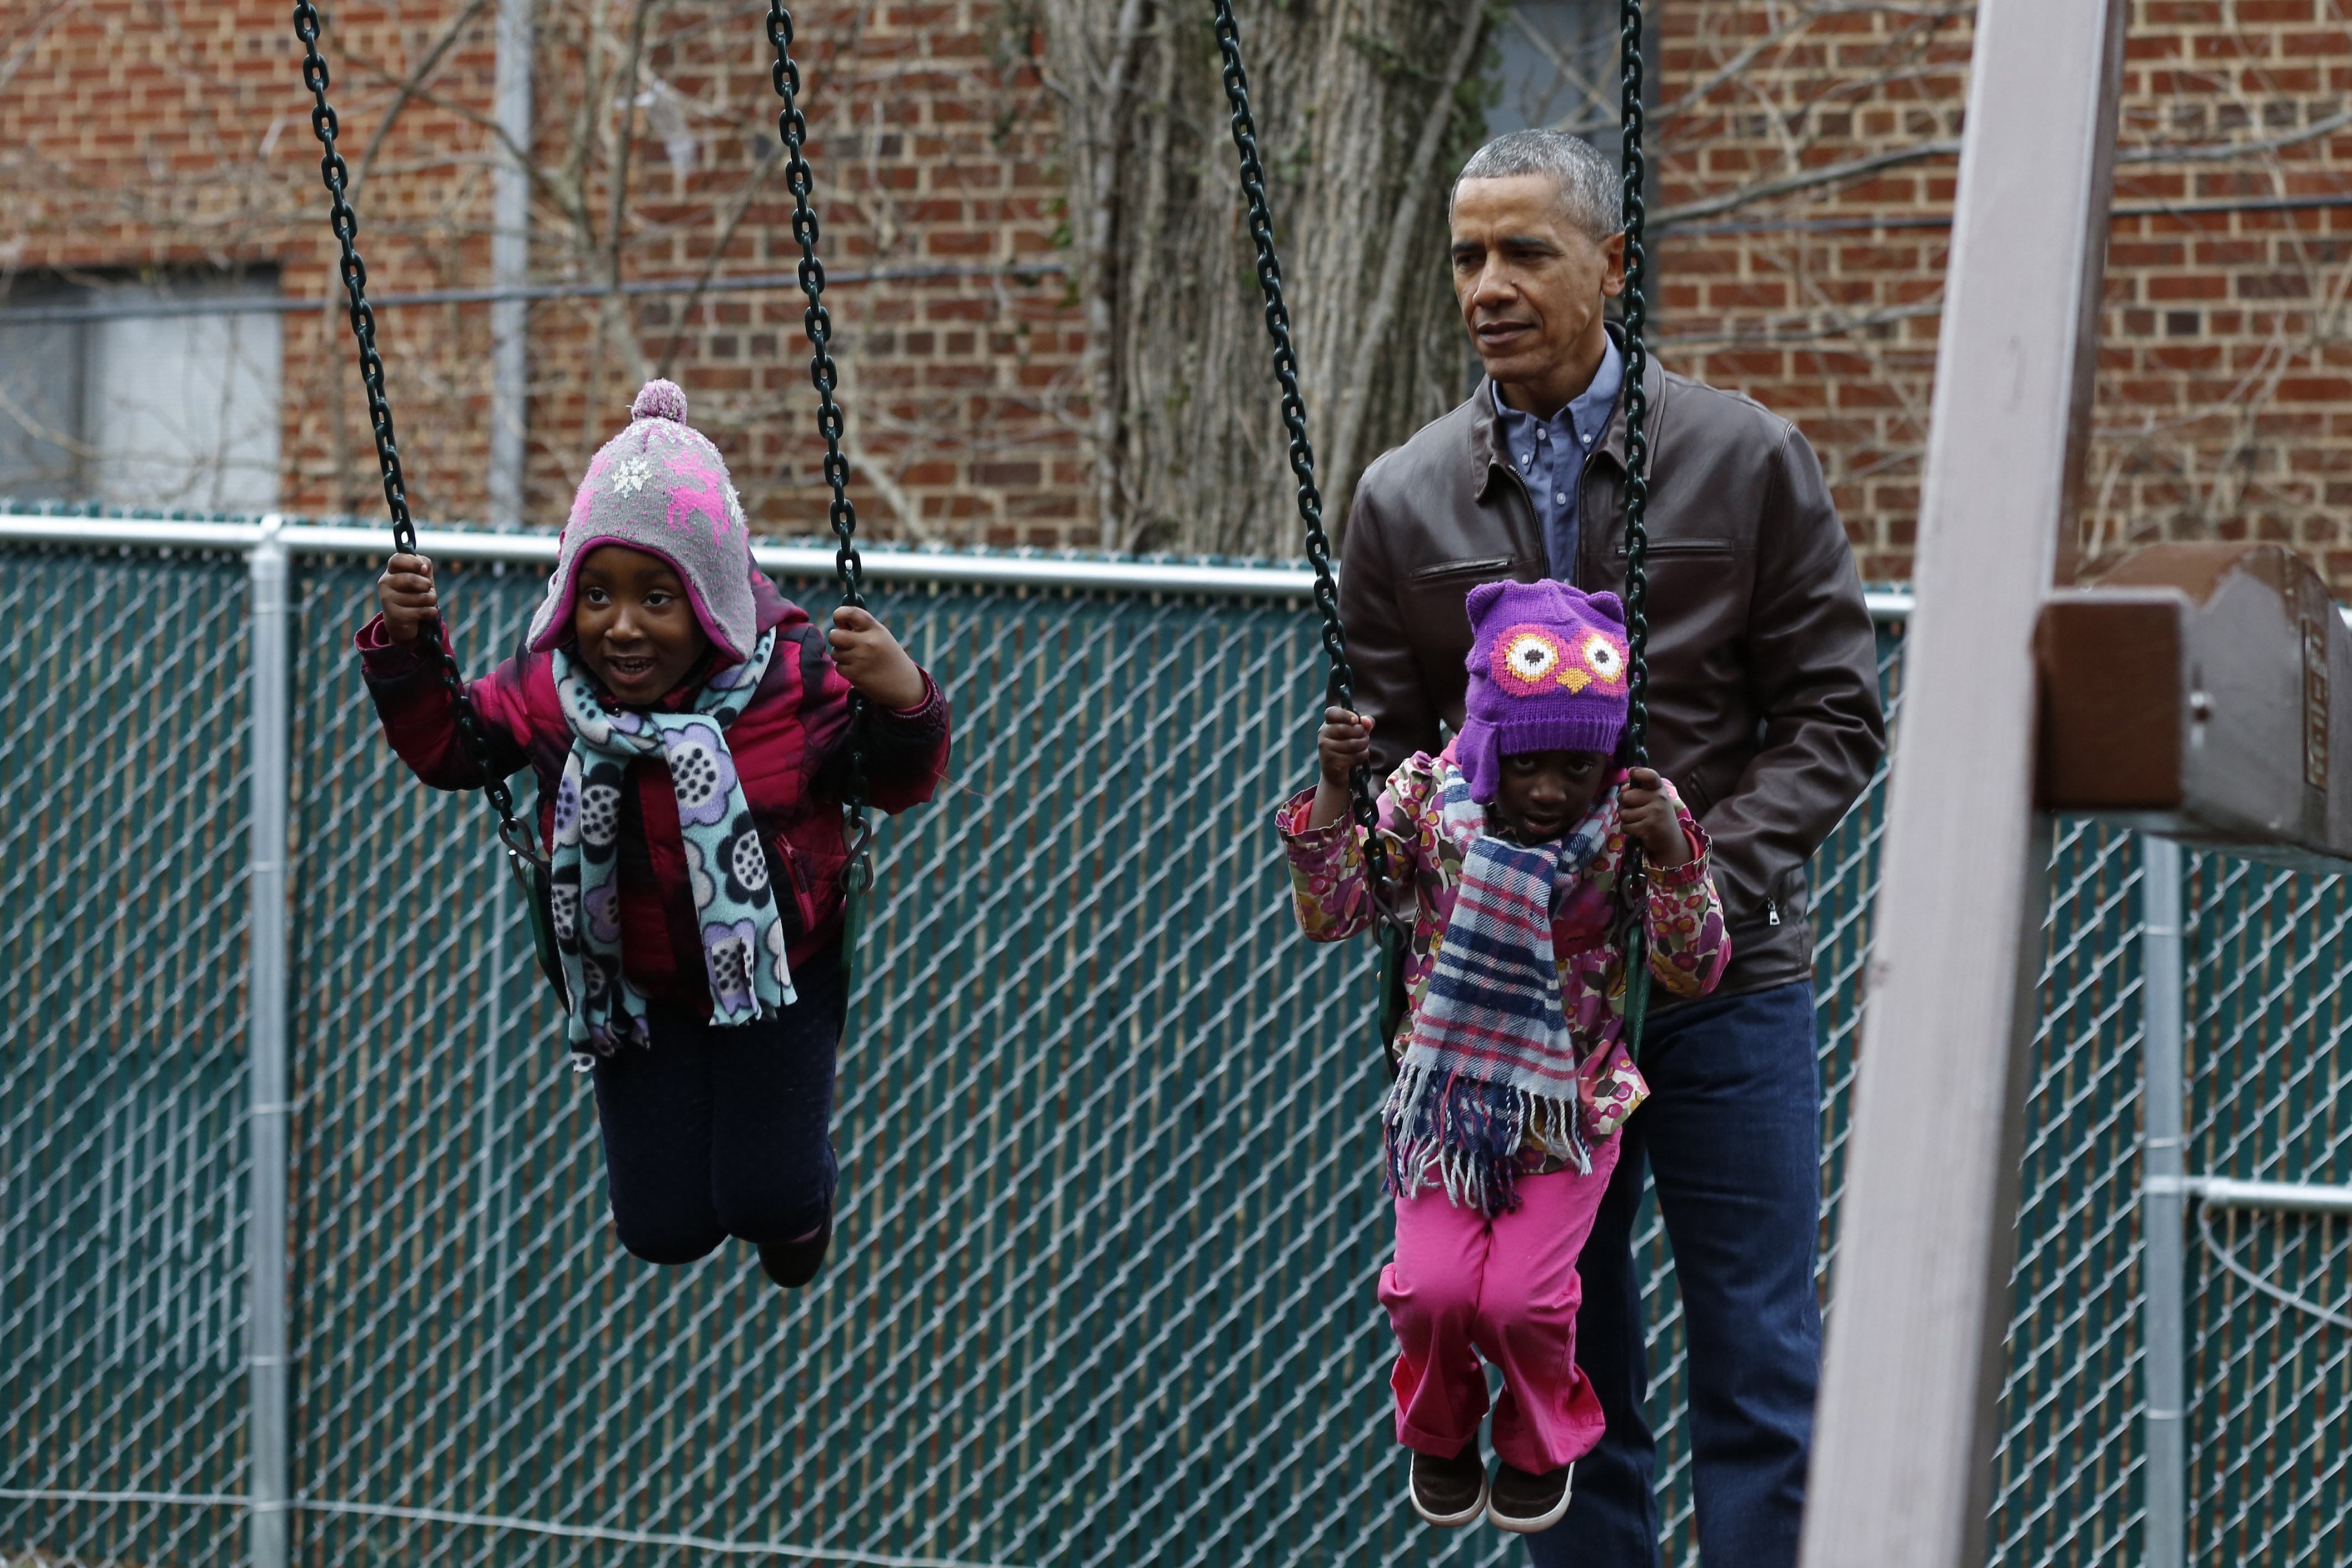 TOPSHOT - US President Barack Obama plays with children on a swing donated by the first family at the Jobs Have Priority Shelter in Washington, DC on January 16, 2017.  / AFP / YURI GRIPAS        (Photo credit should read YURI GRIPAS/AFP/Getty Images) (YURI GRIPAS—AFP/Getty Images)